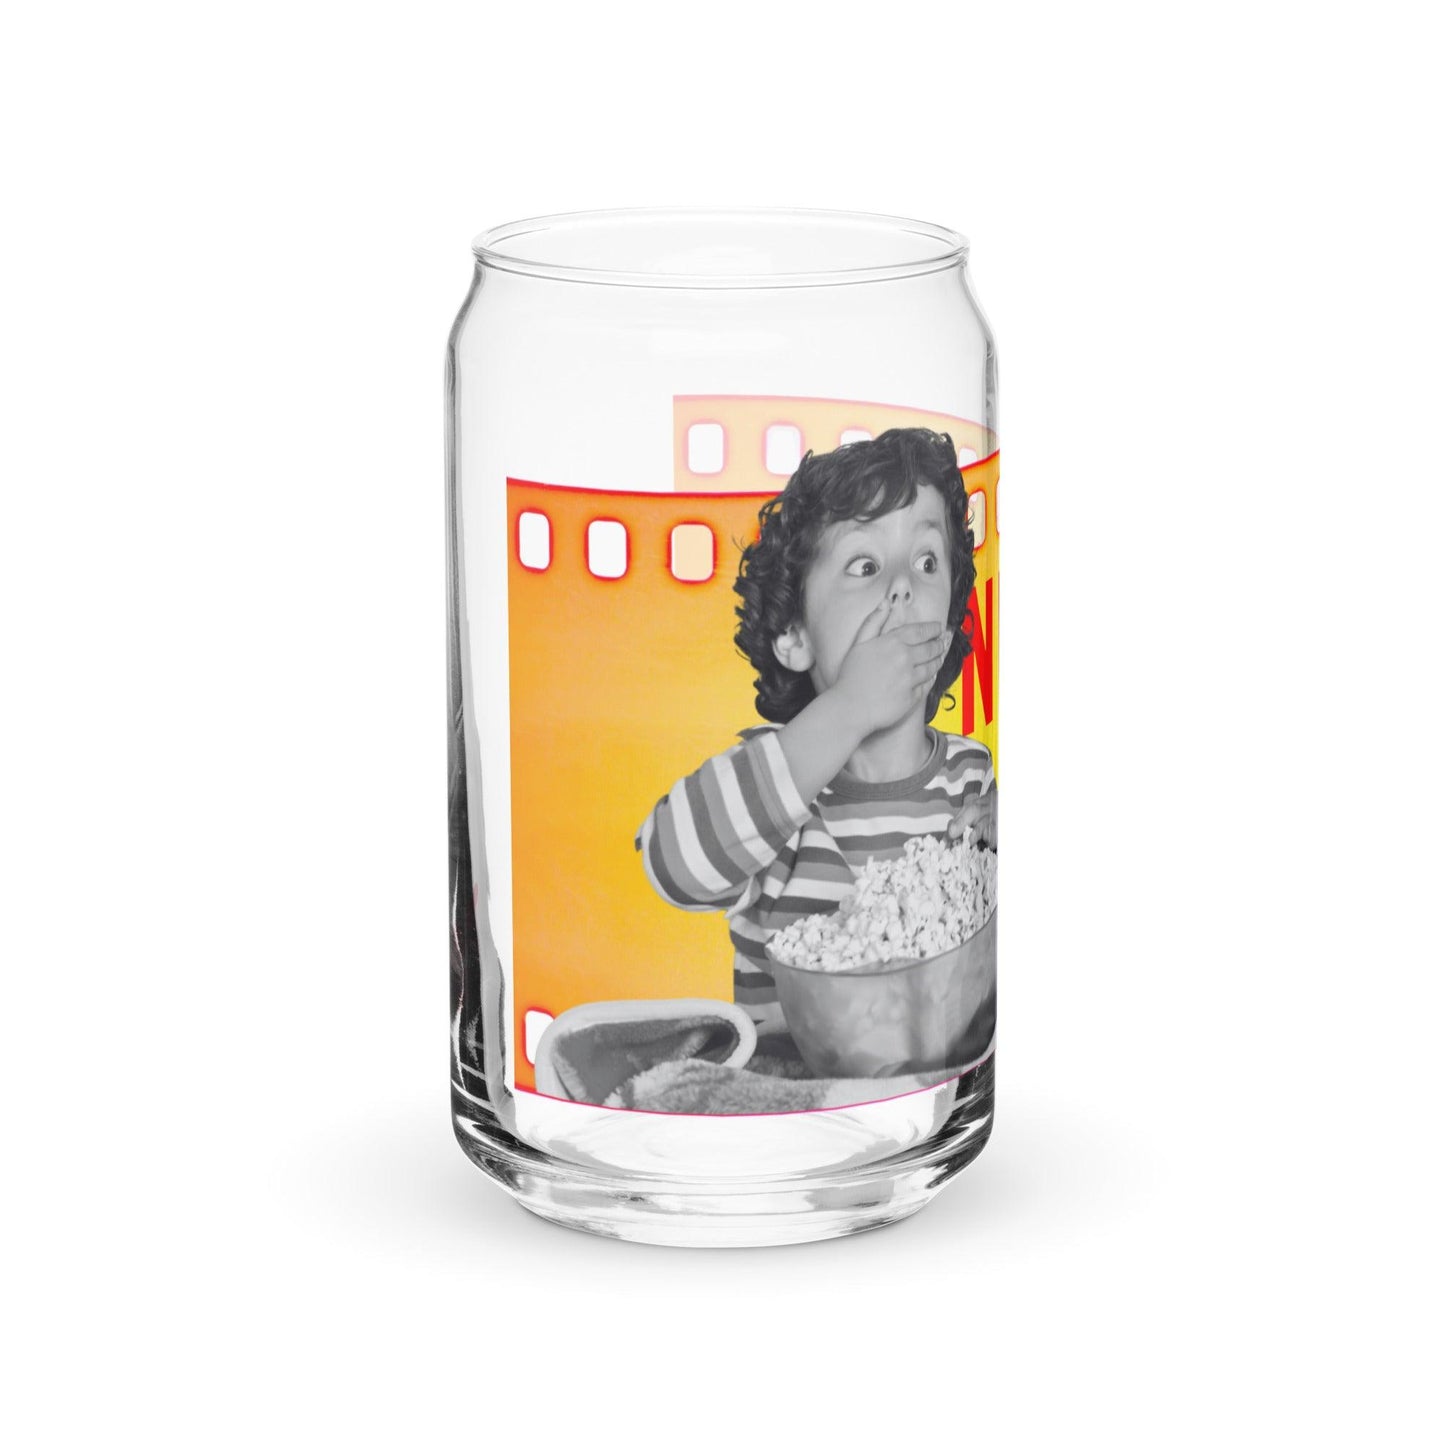 What's better than a Saturday night at home doing Netflix and Chill? Netflix and CHI! If your best Netflix and Chill sofa buddy is a little chihuahua, this adorable Netflix and Chi tumbler is for you. Or a brilliant gift for chihuahua parents. Unusual can-shaped glass tumbler featuring a boy and his chihuahua pal watching a scary movie together, with the words "Netflix and Chi". Generous volume of just under a pint, making it a versatile tumbler for sodas, cocktails, juice, water, beer...